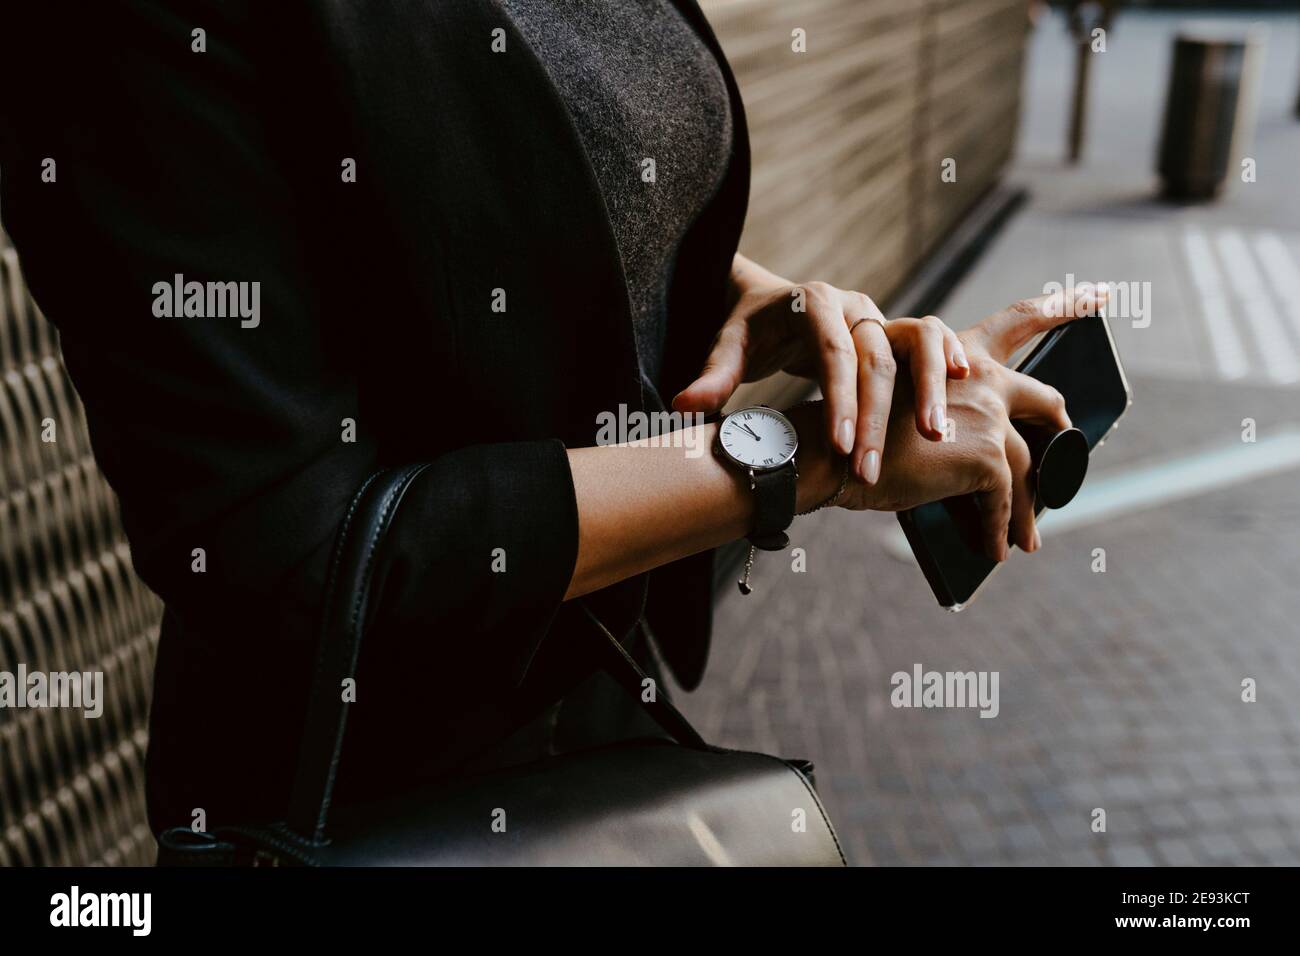 Midsection of businesswoman checking time on wristwatch Stock Photo